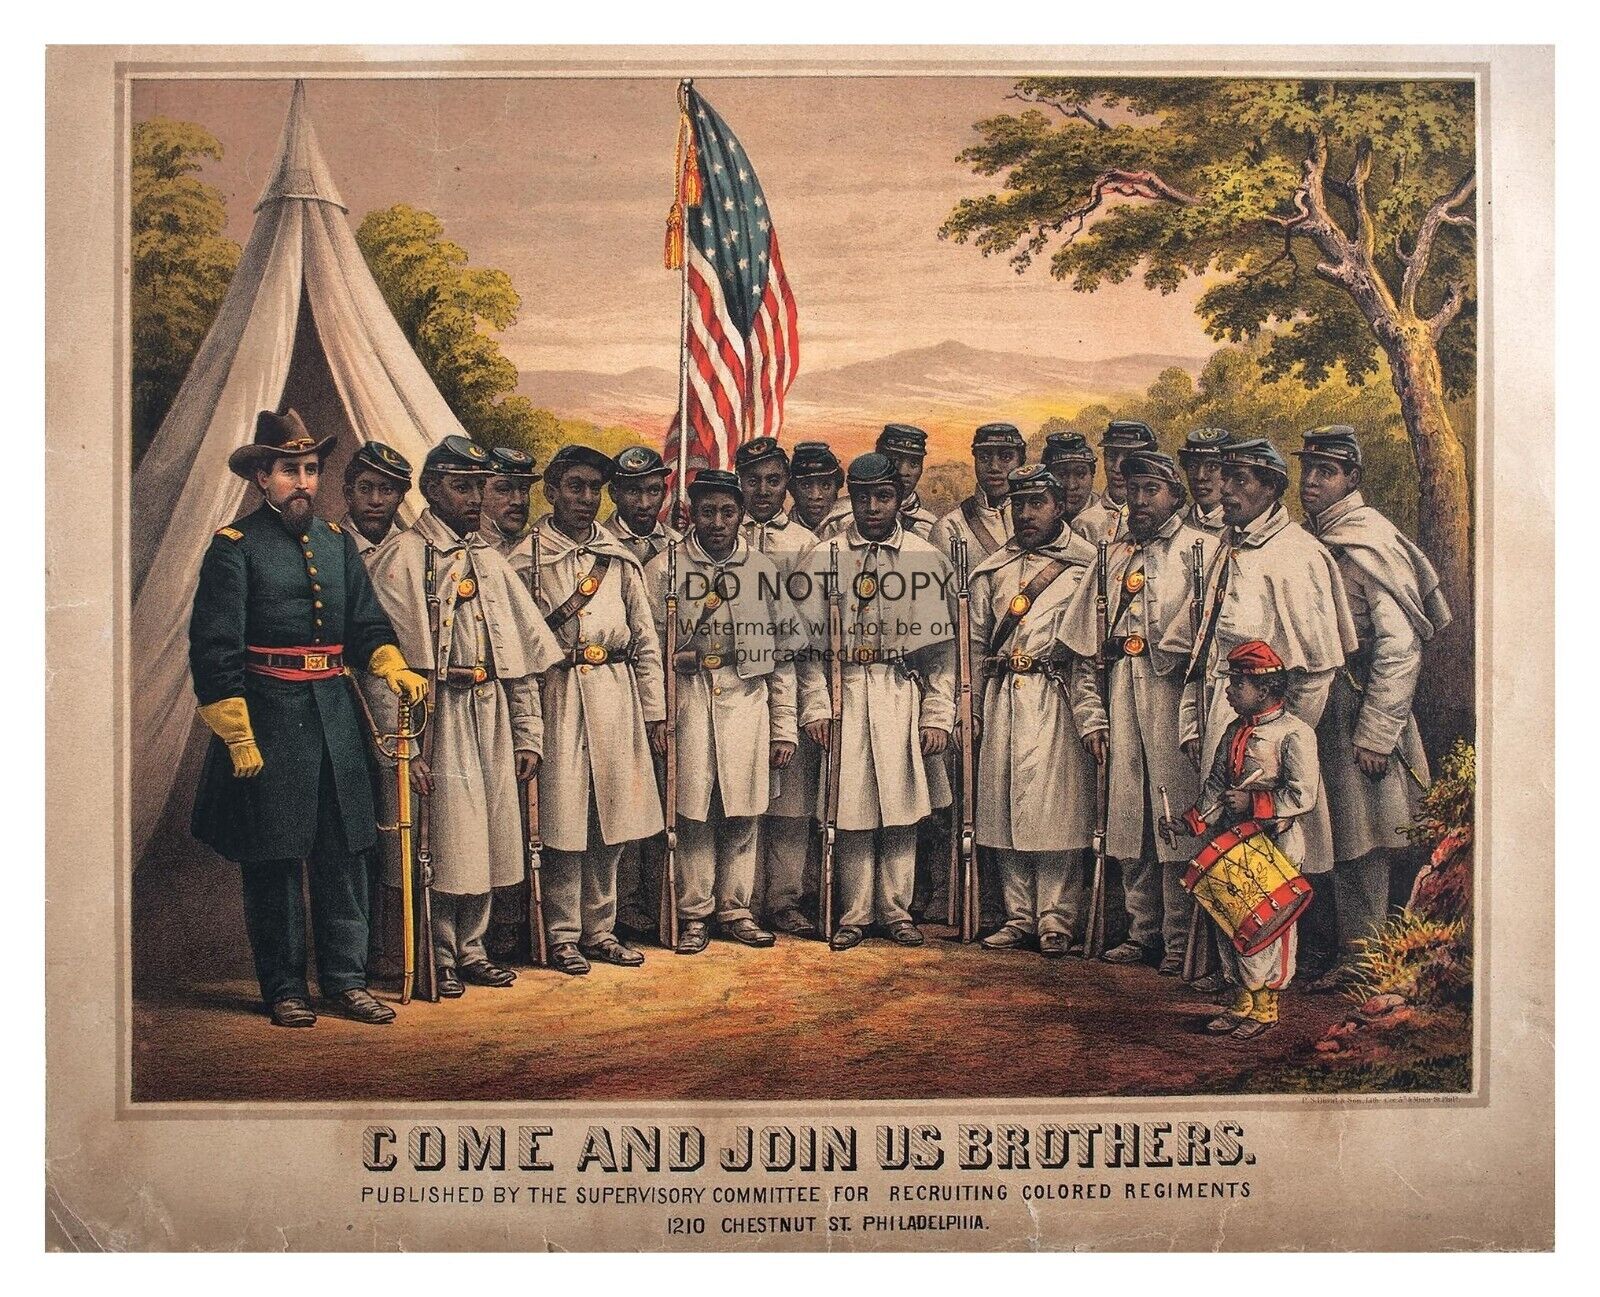 CIVIL WAR AFRICAN AMERICAN SOLDIERS RECRUITING ADVERTISEMENT POSTER 8X10 PHOTO